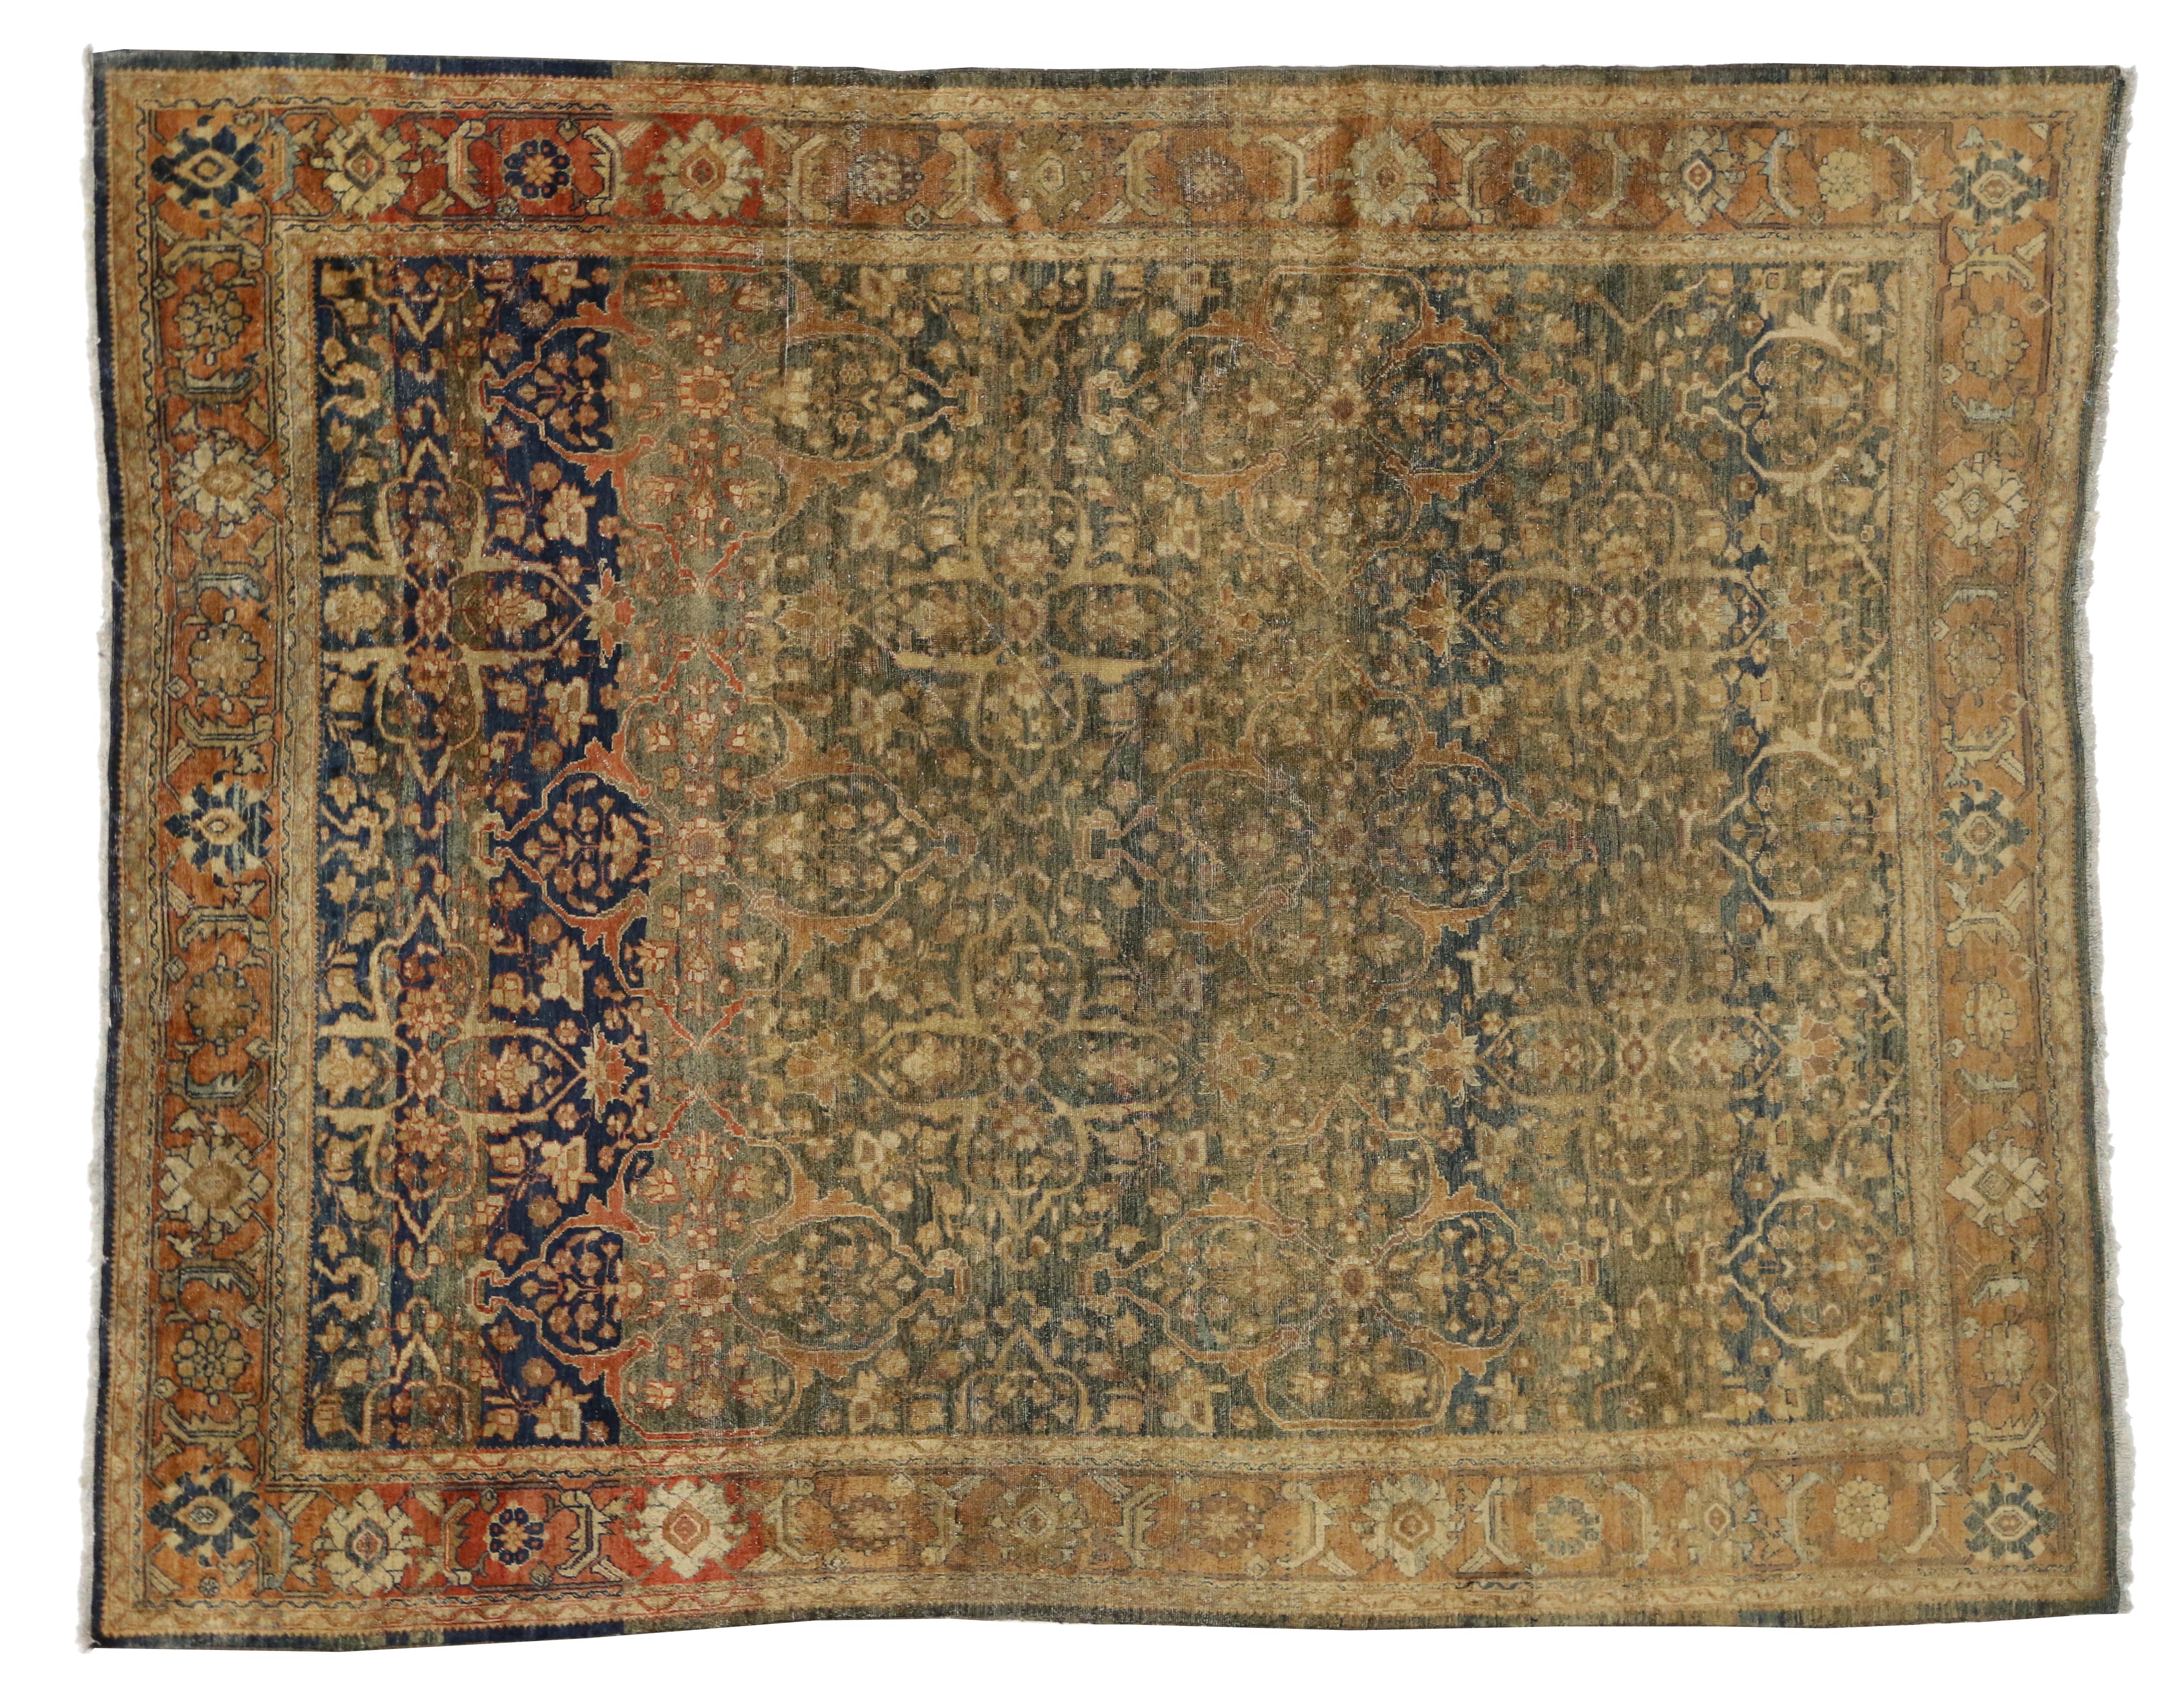 Hand-Knotted Distressed Antique Persian Mahal Rug with Rustic English Traditional Style